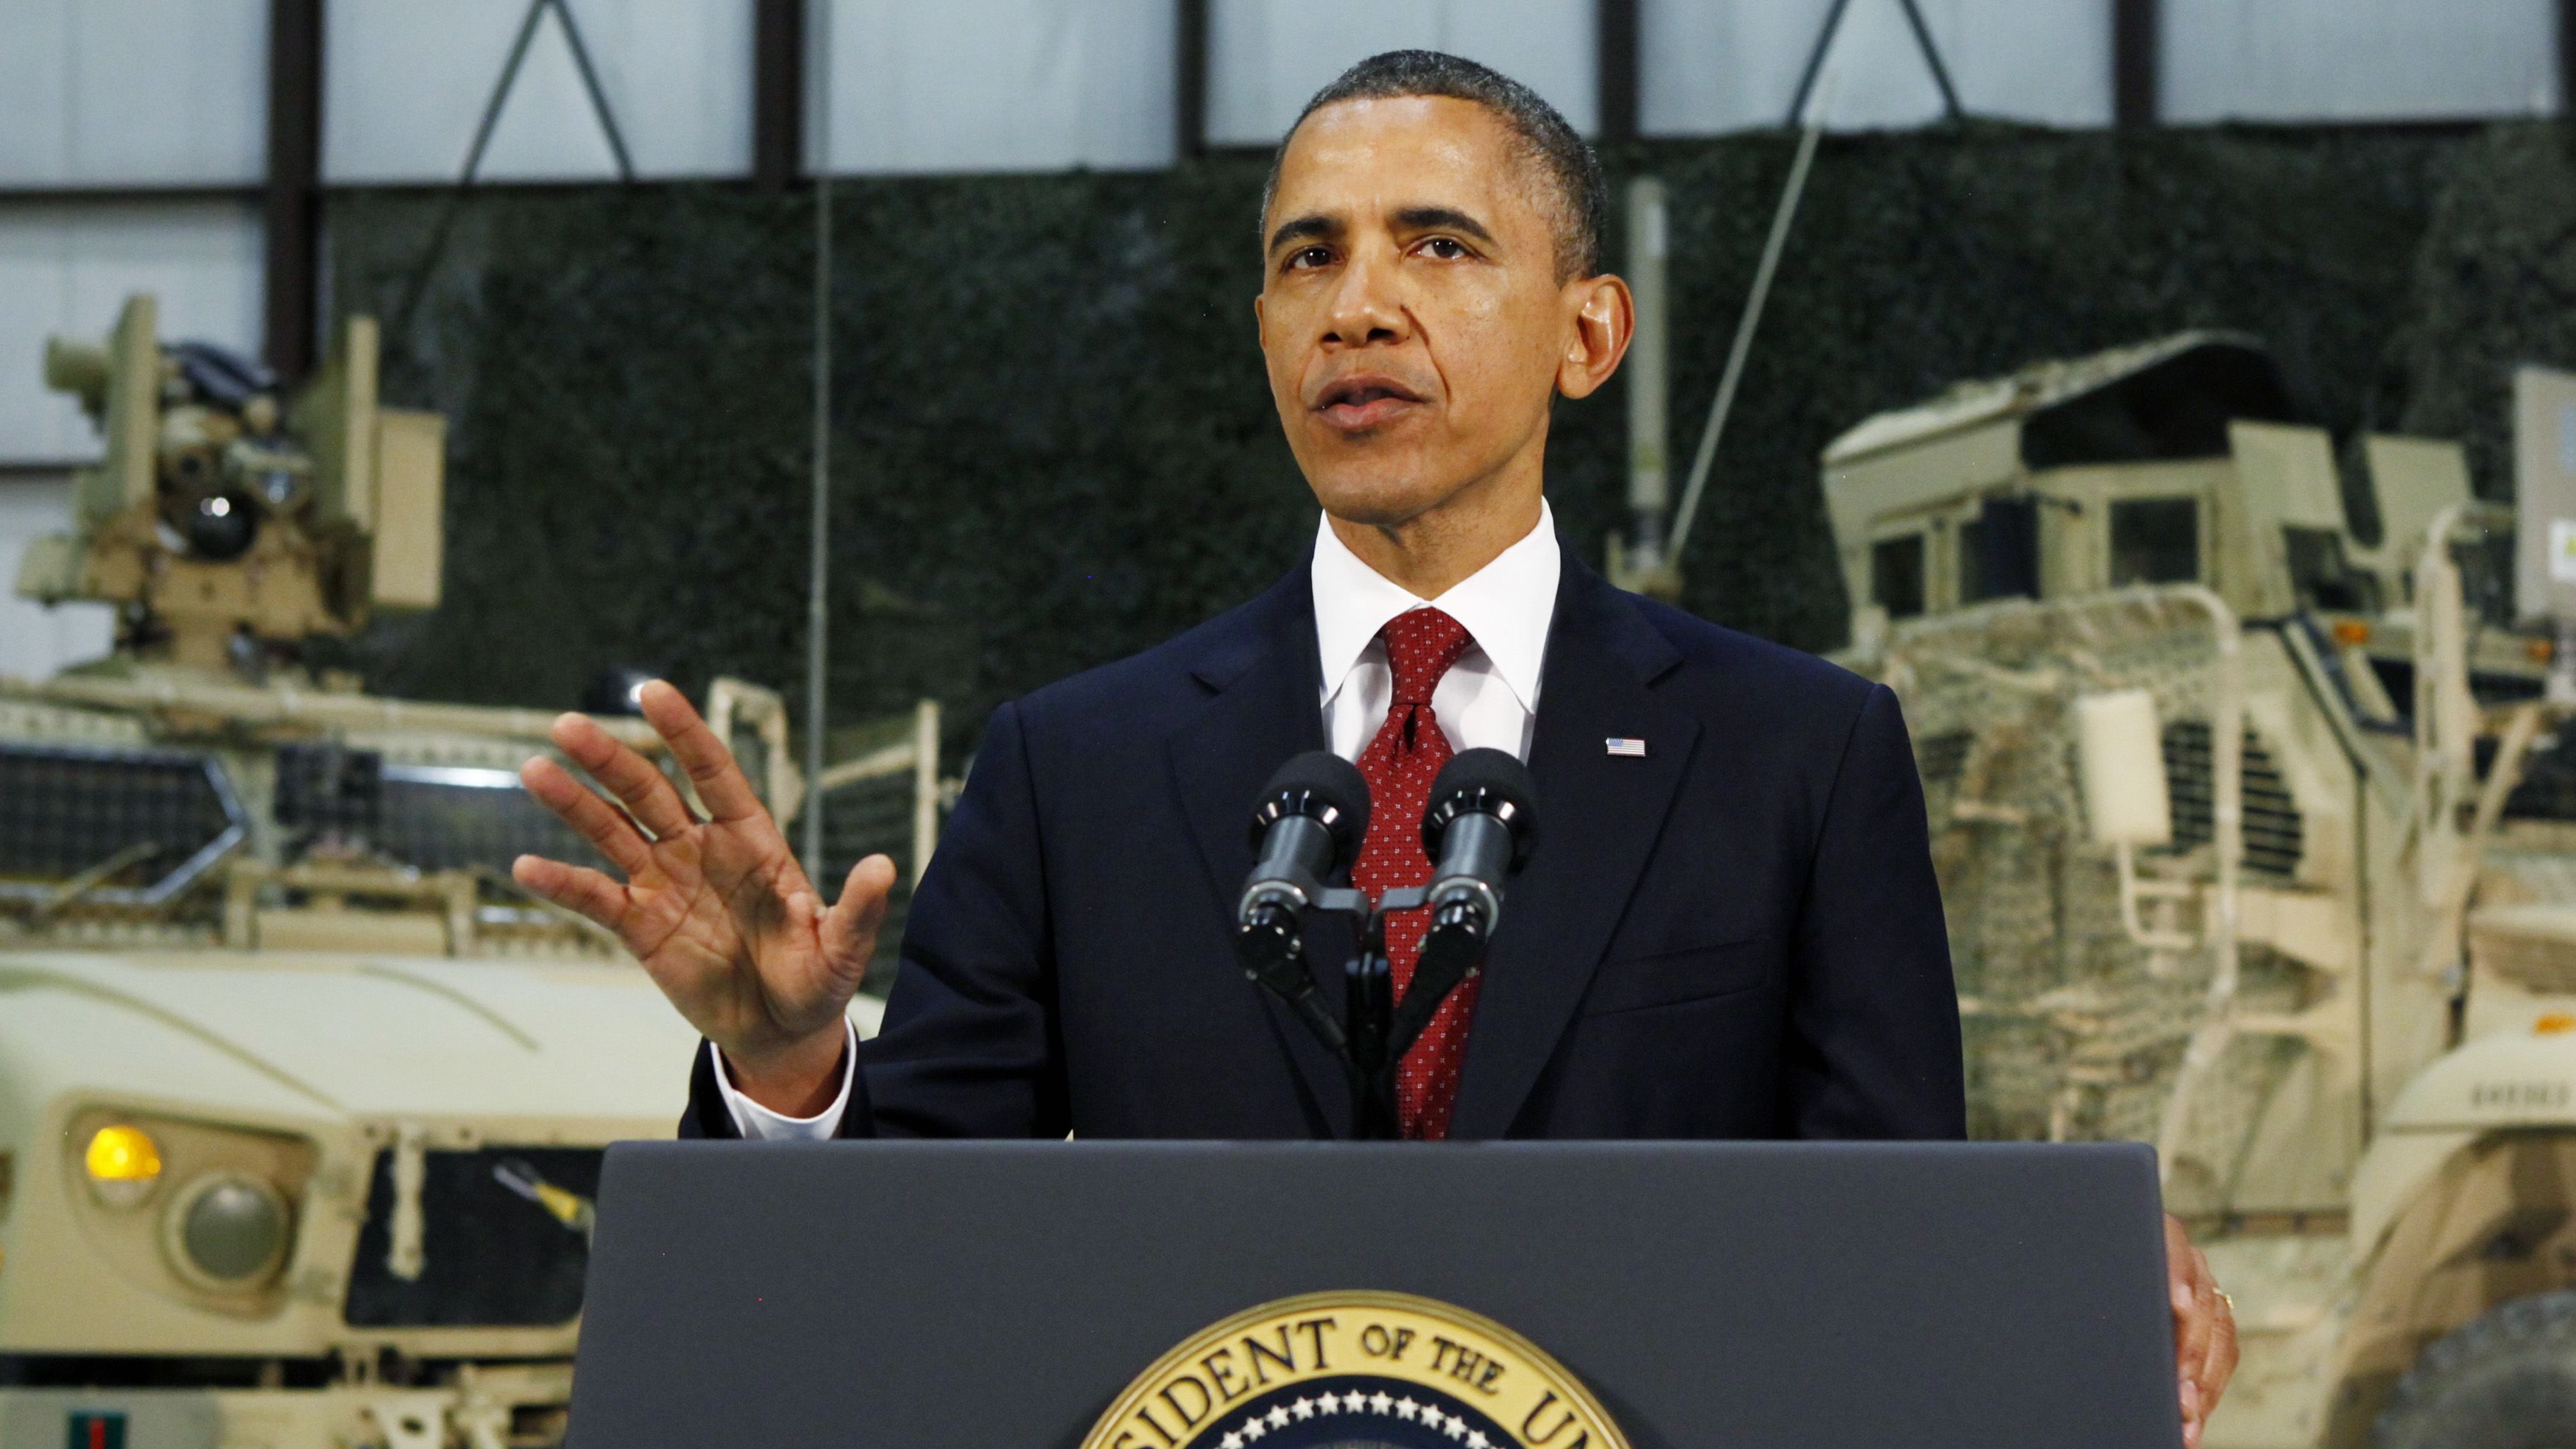 President Barack Obama pledged to continue U.S. support for a sovereign, peaceful state in Afghanistan.